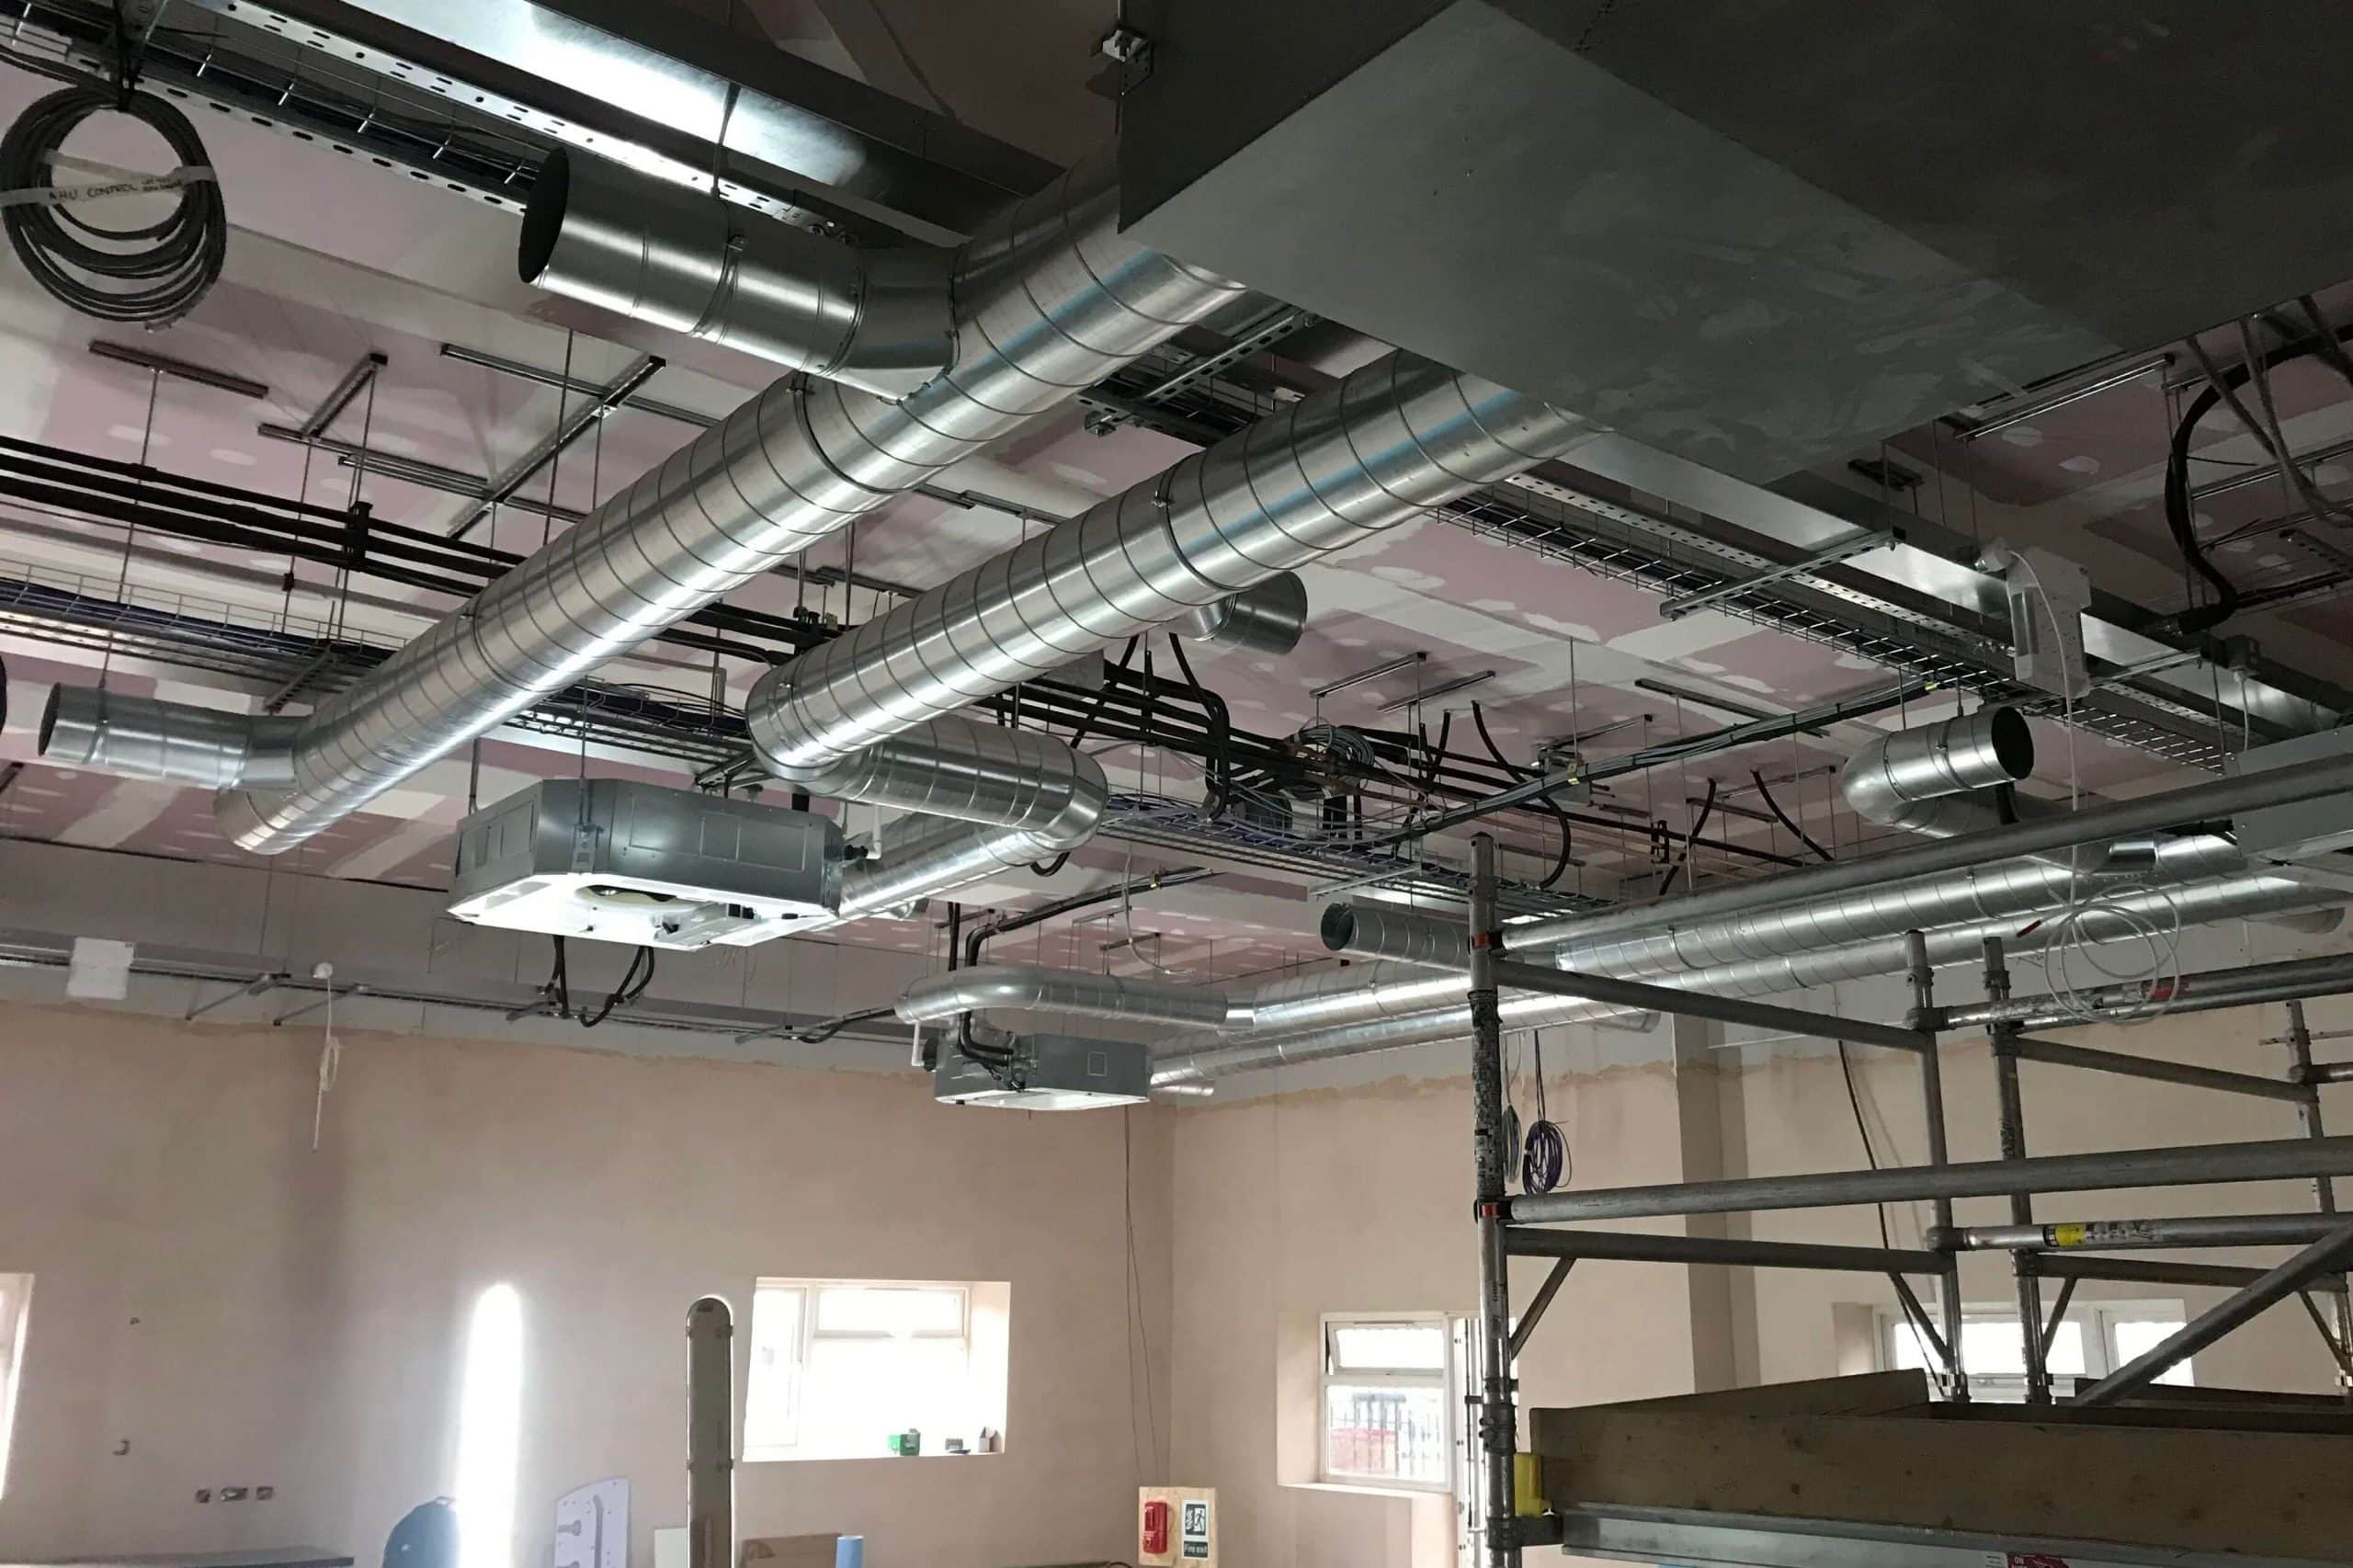 Norwood junction large commercial air conditioning solution by SubCool FM hanging unit amongst pipes in ceiling building view